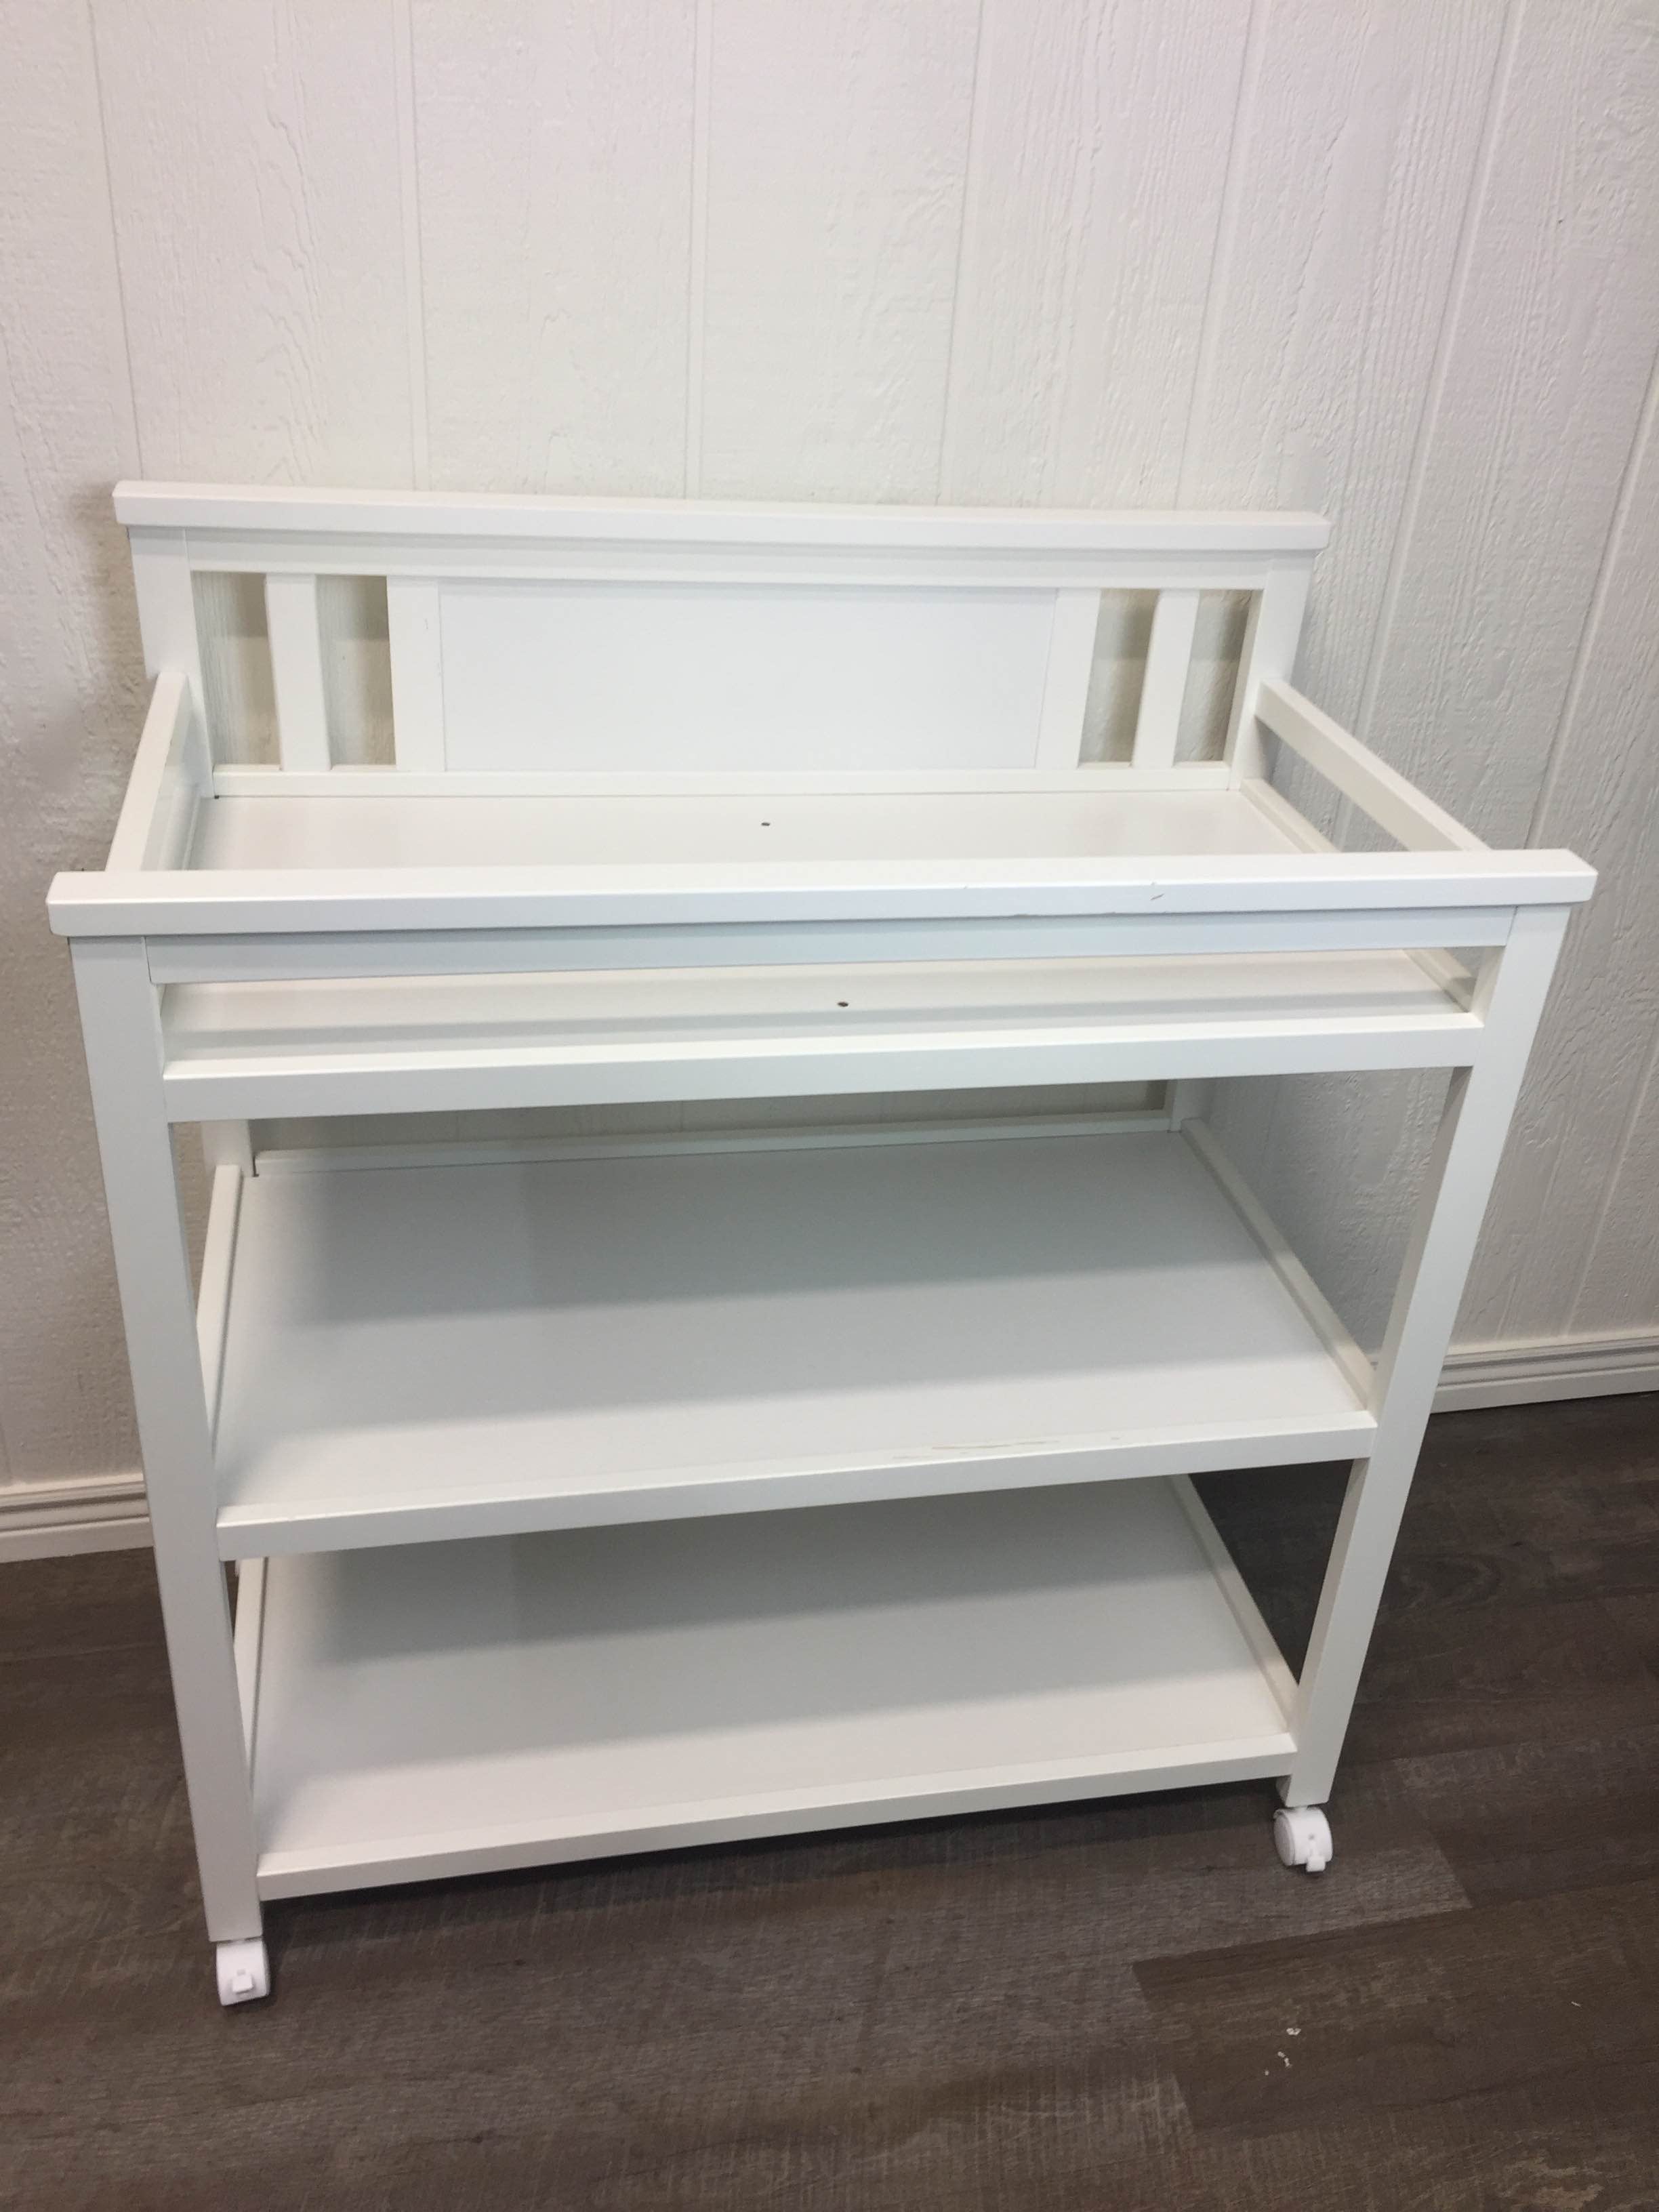 delta childrens changing table